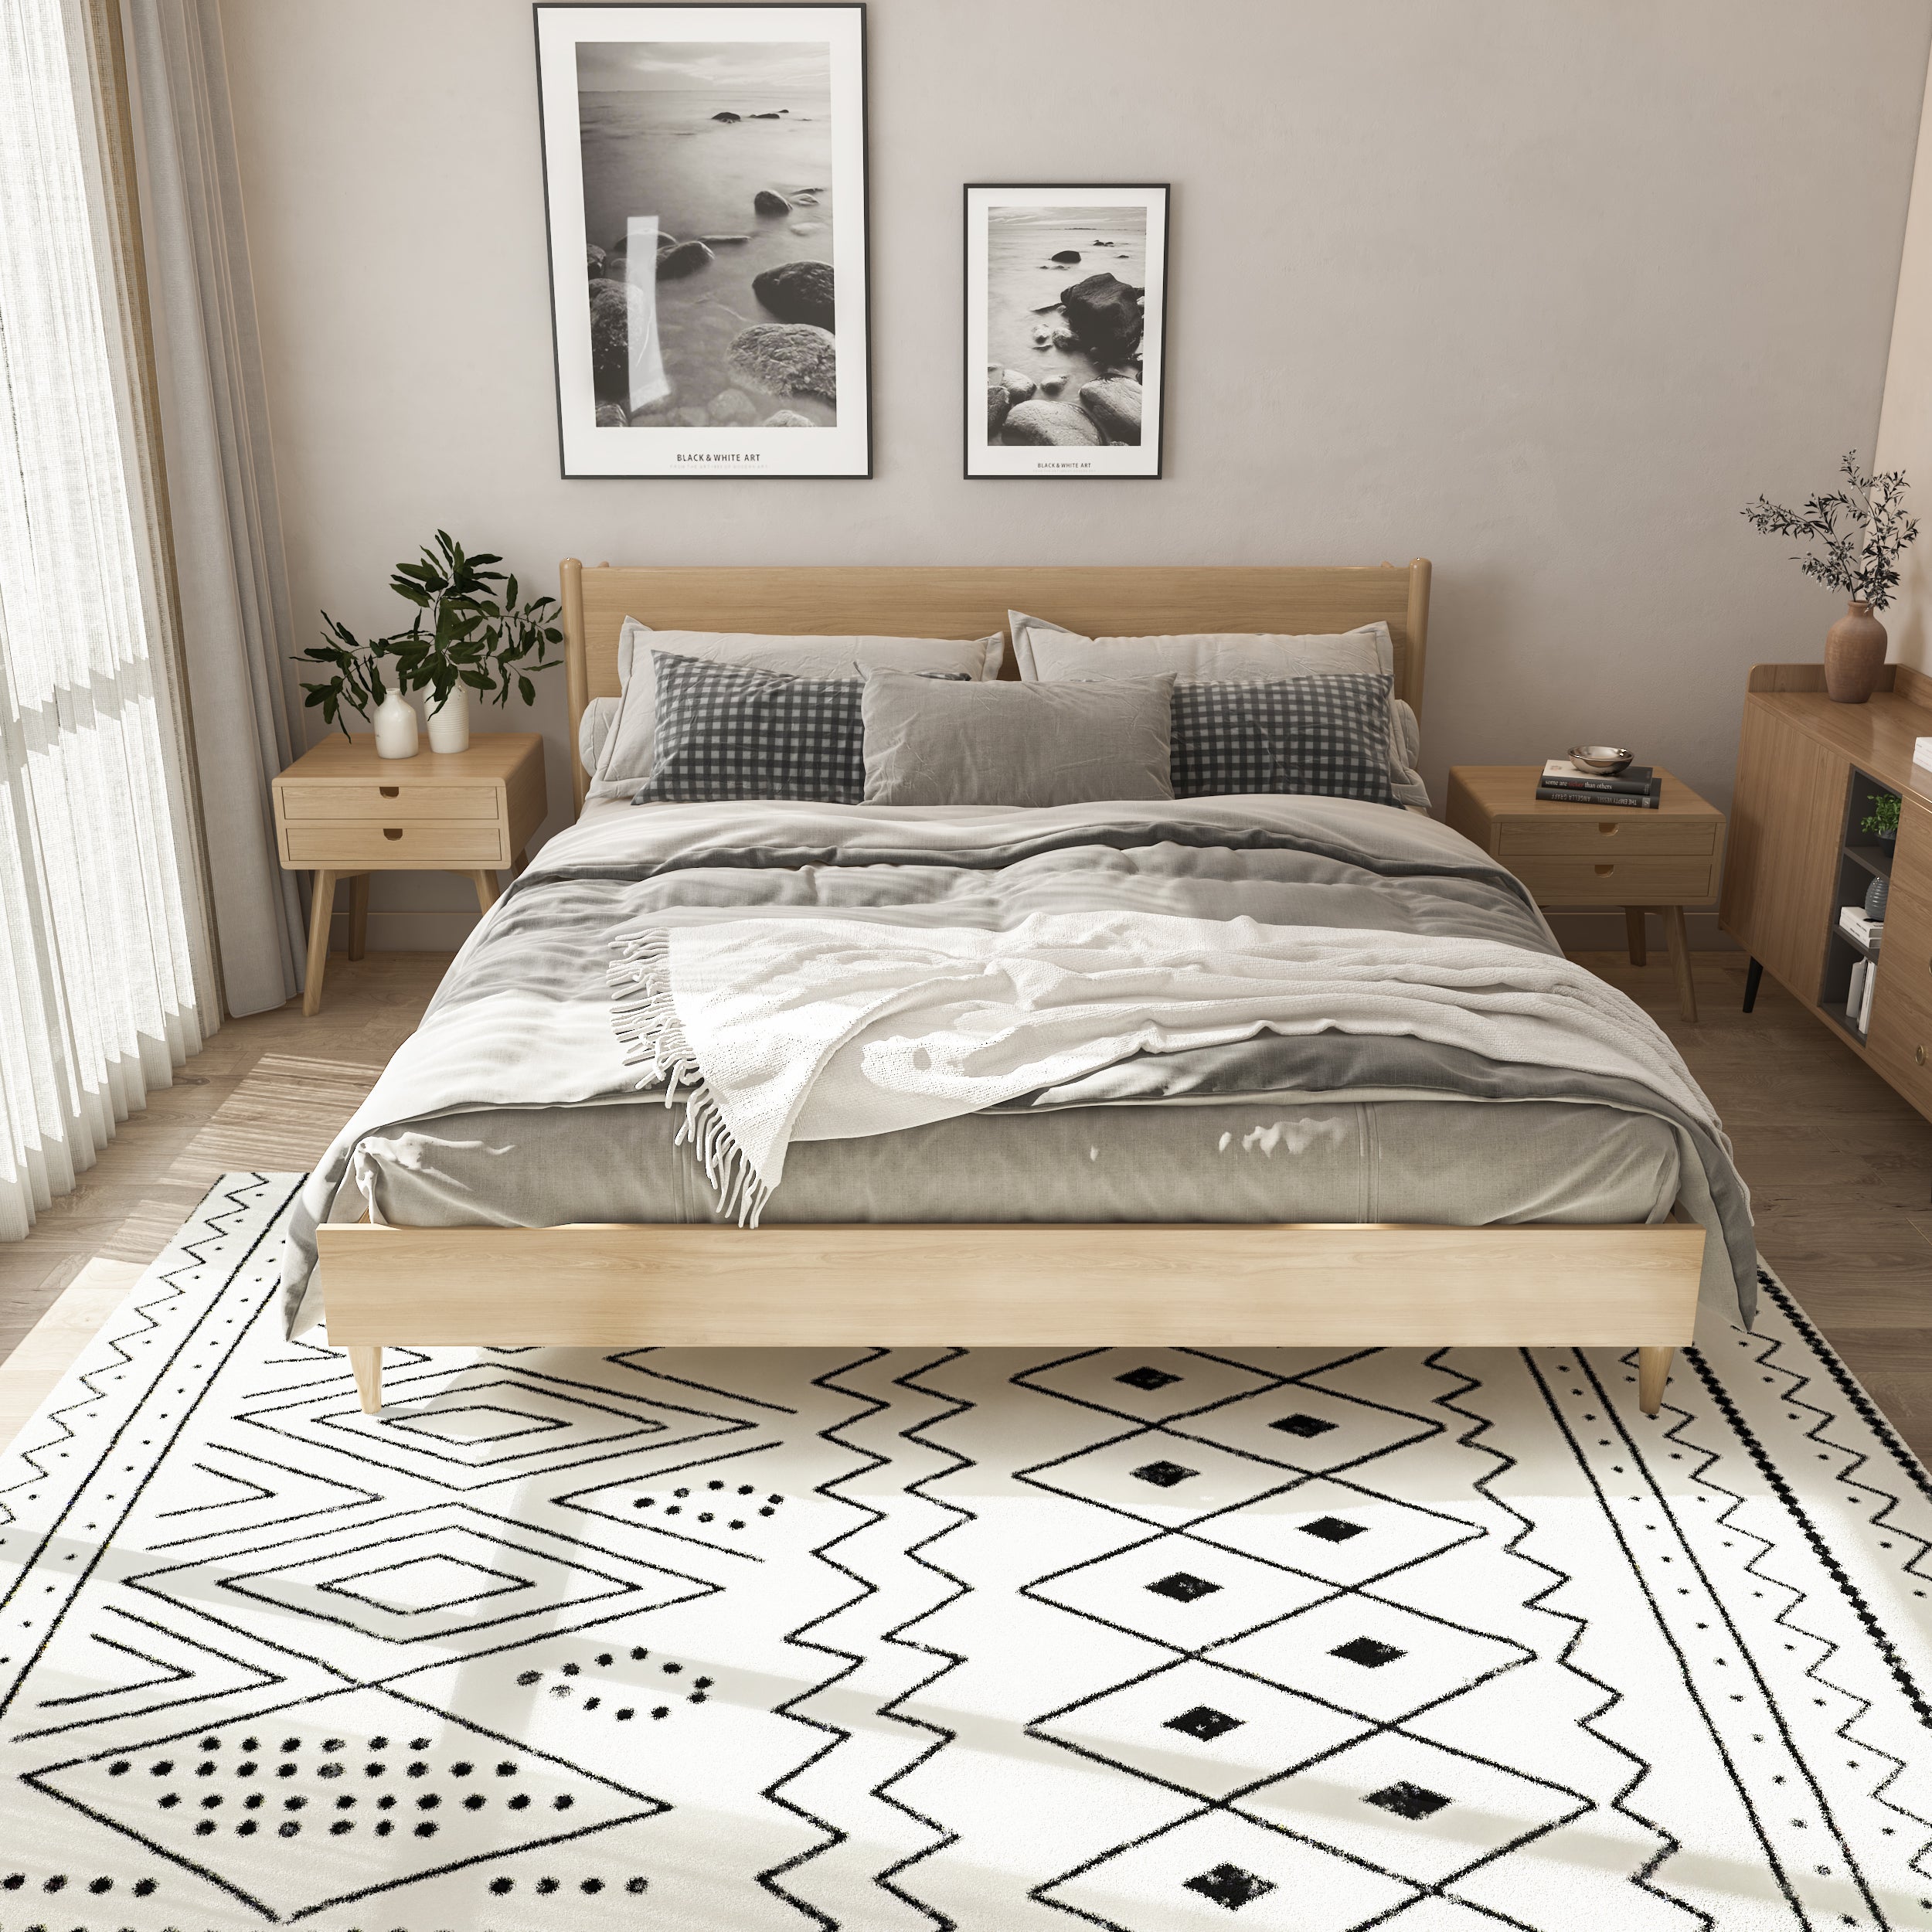 Snailhome® Soft Area Rugs Foldable Abstract Modern Geometric Rugs